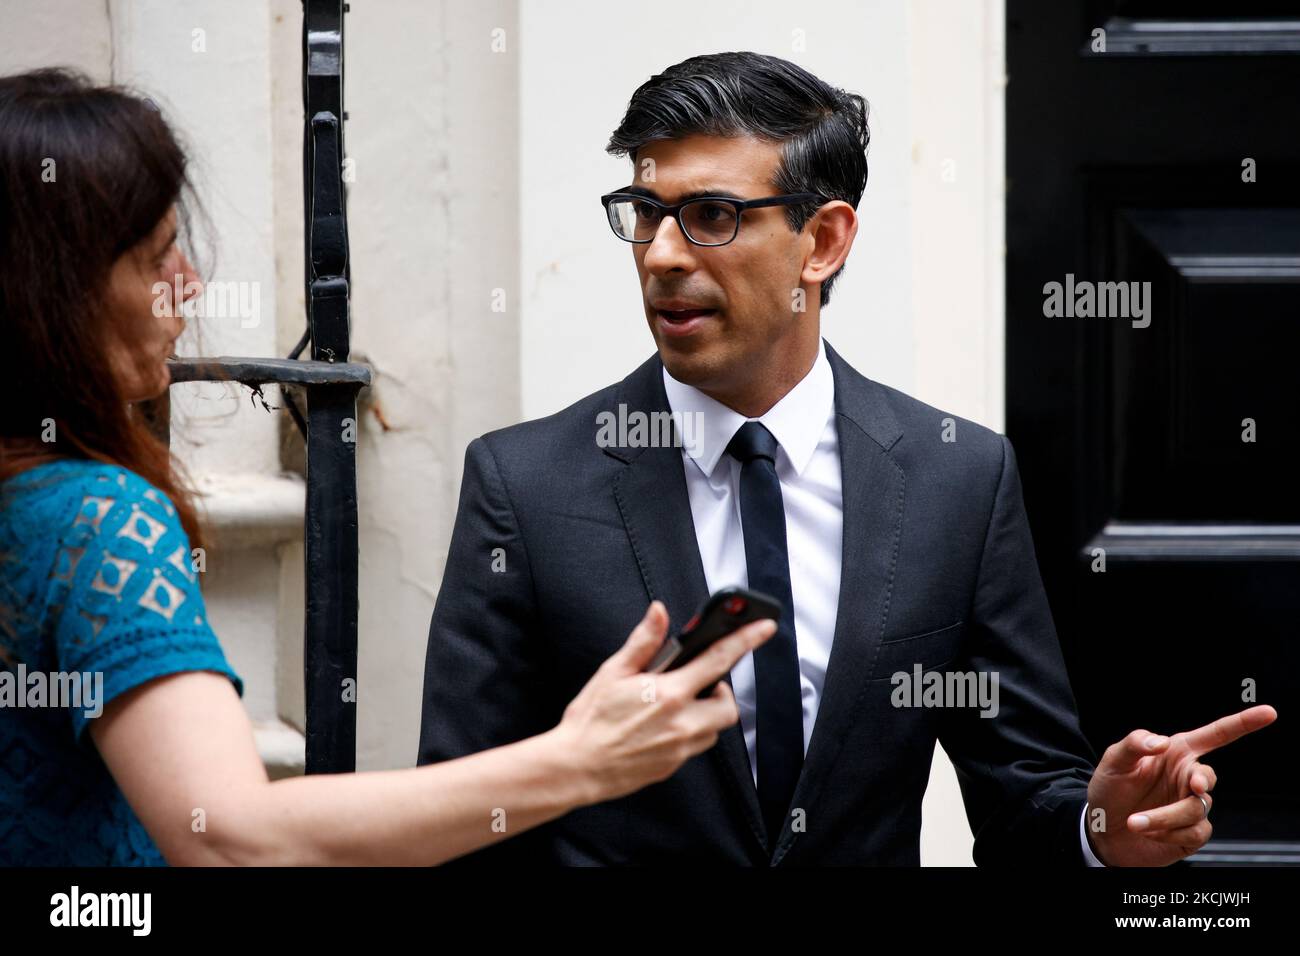 British Chancellor of the Exchequer Rishi Sunak, Conservative Party MP for Richmond (Yorks), stands outside 11 Downing Street in London, England, on August 18, 2021. (Photo by David Cliff/NurPhoto) Stock Photo